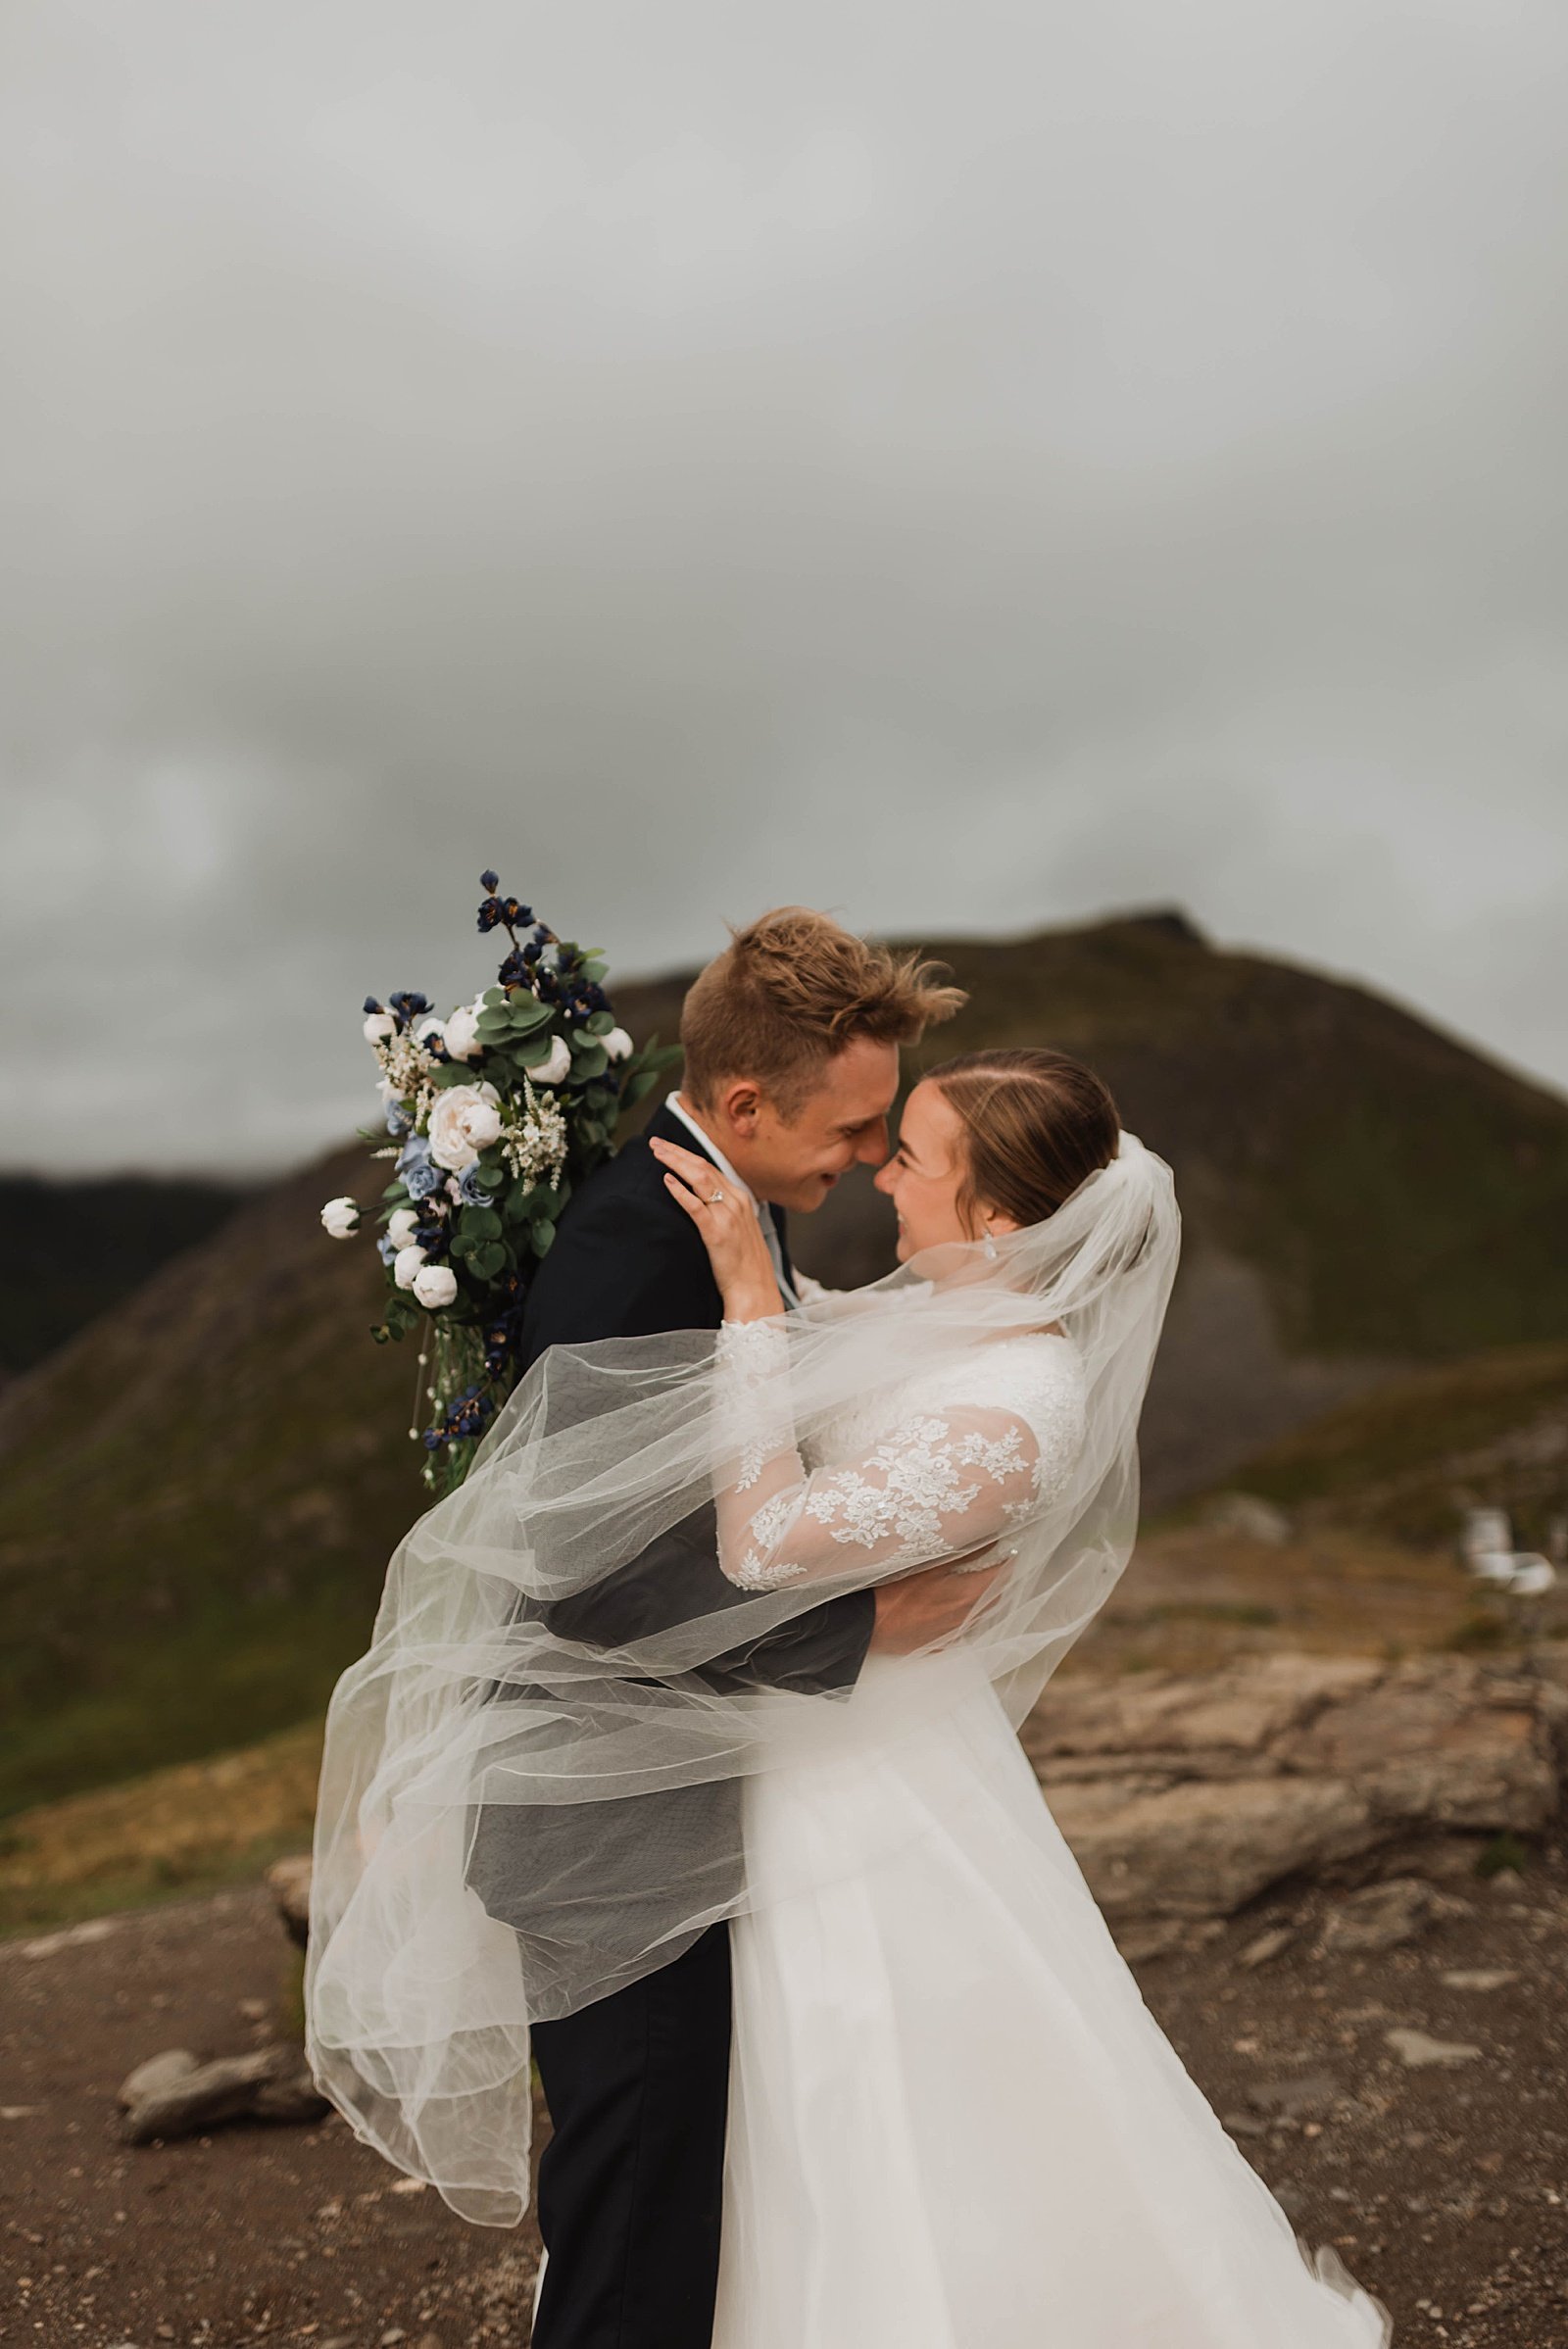  Bride and groom embracing on an Alaska mountaintop for a couple portrait session.  